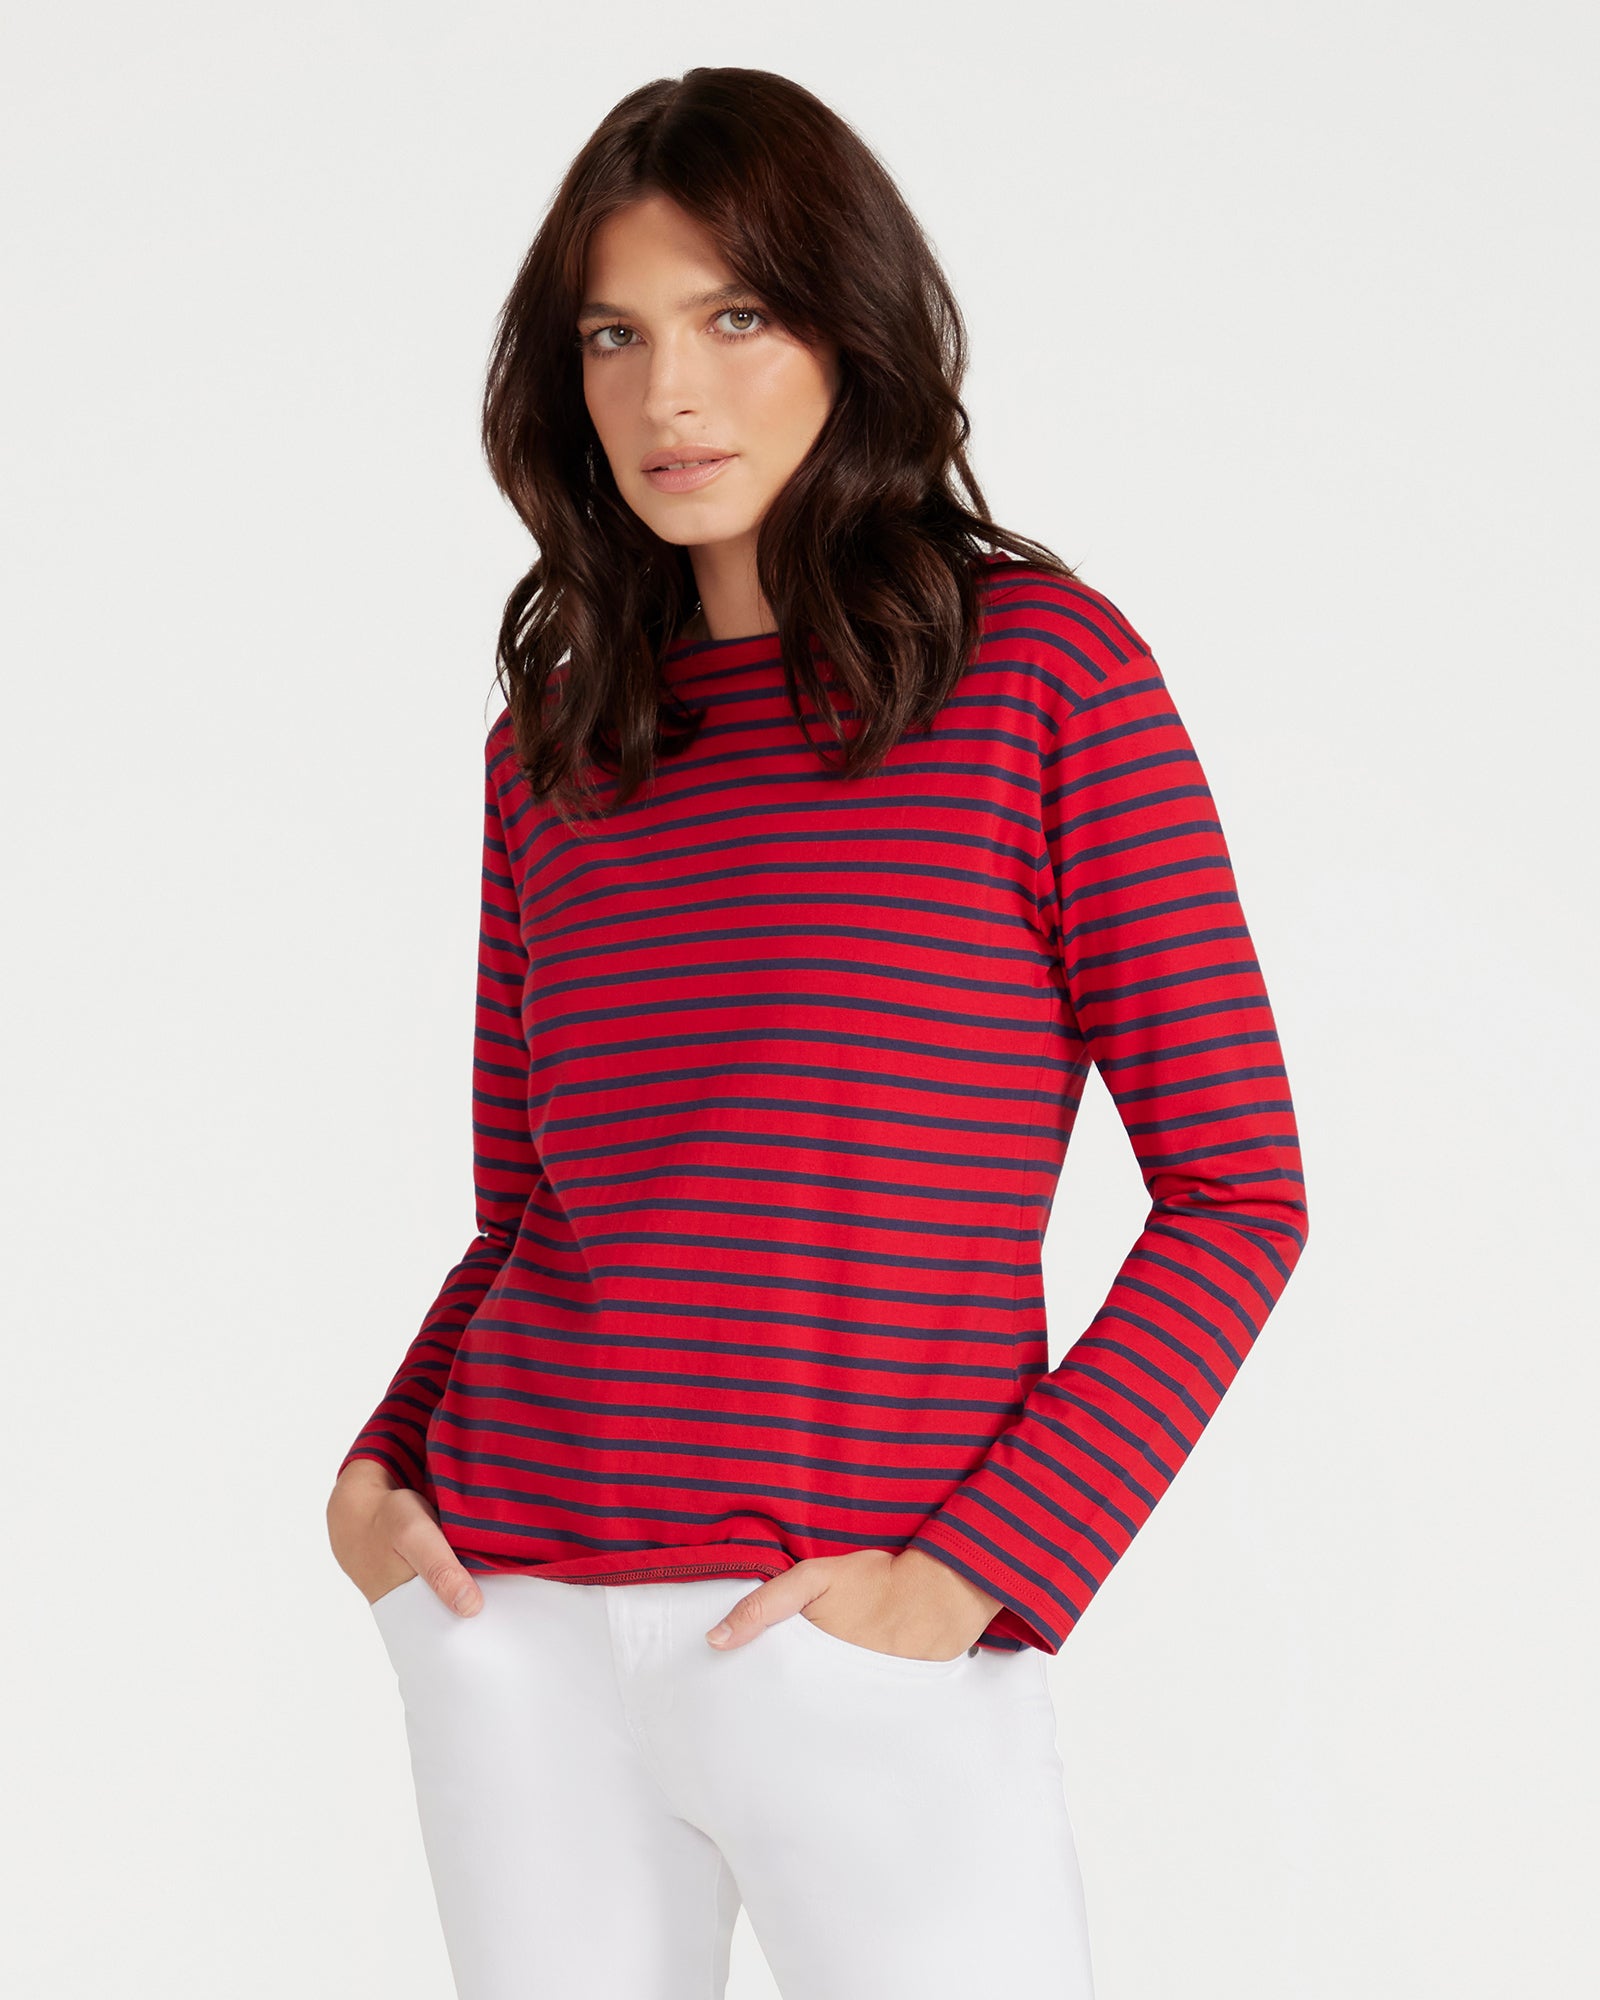 Breton Top - Red with Navy Stripe